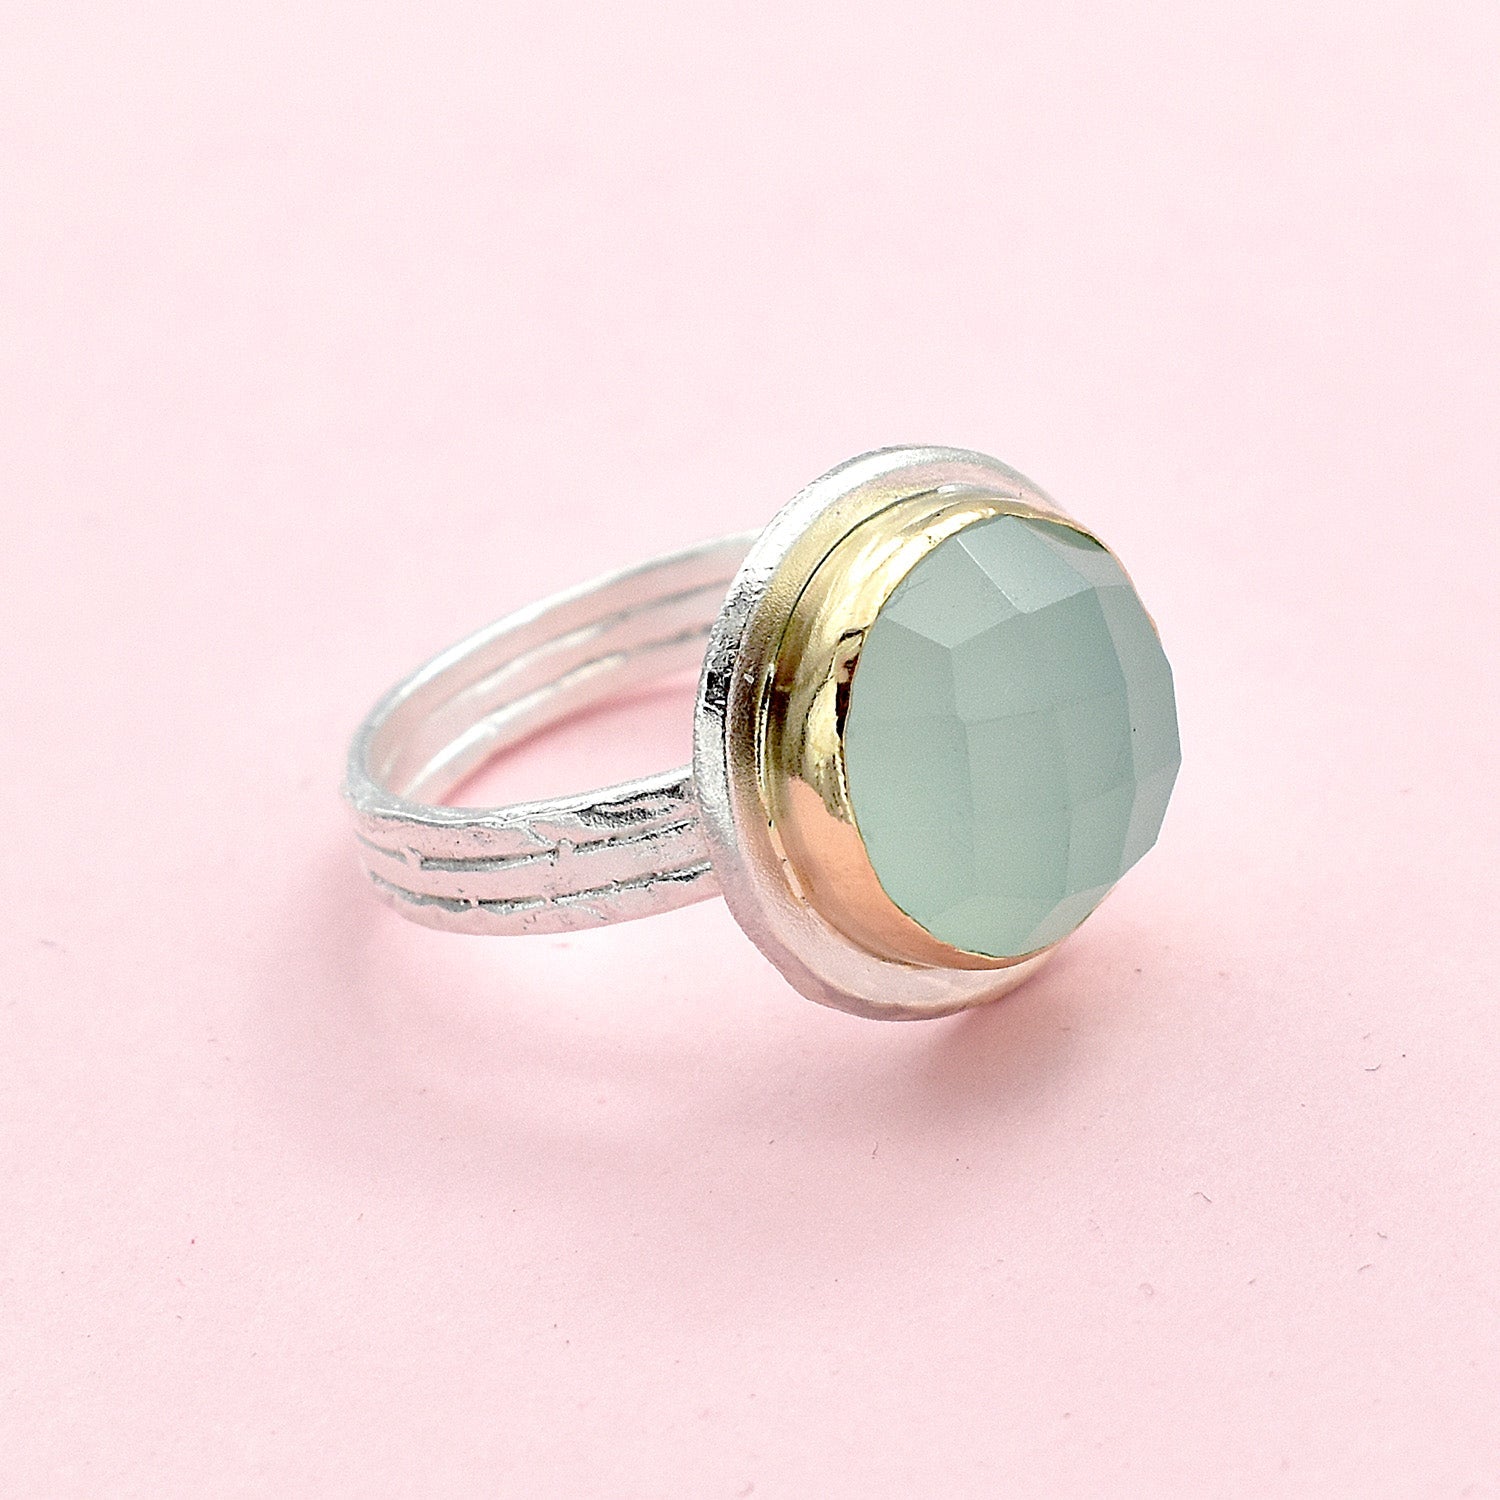 Faceted Round Aqua Chalcedony Ring - Rings